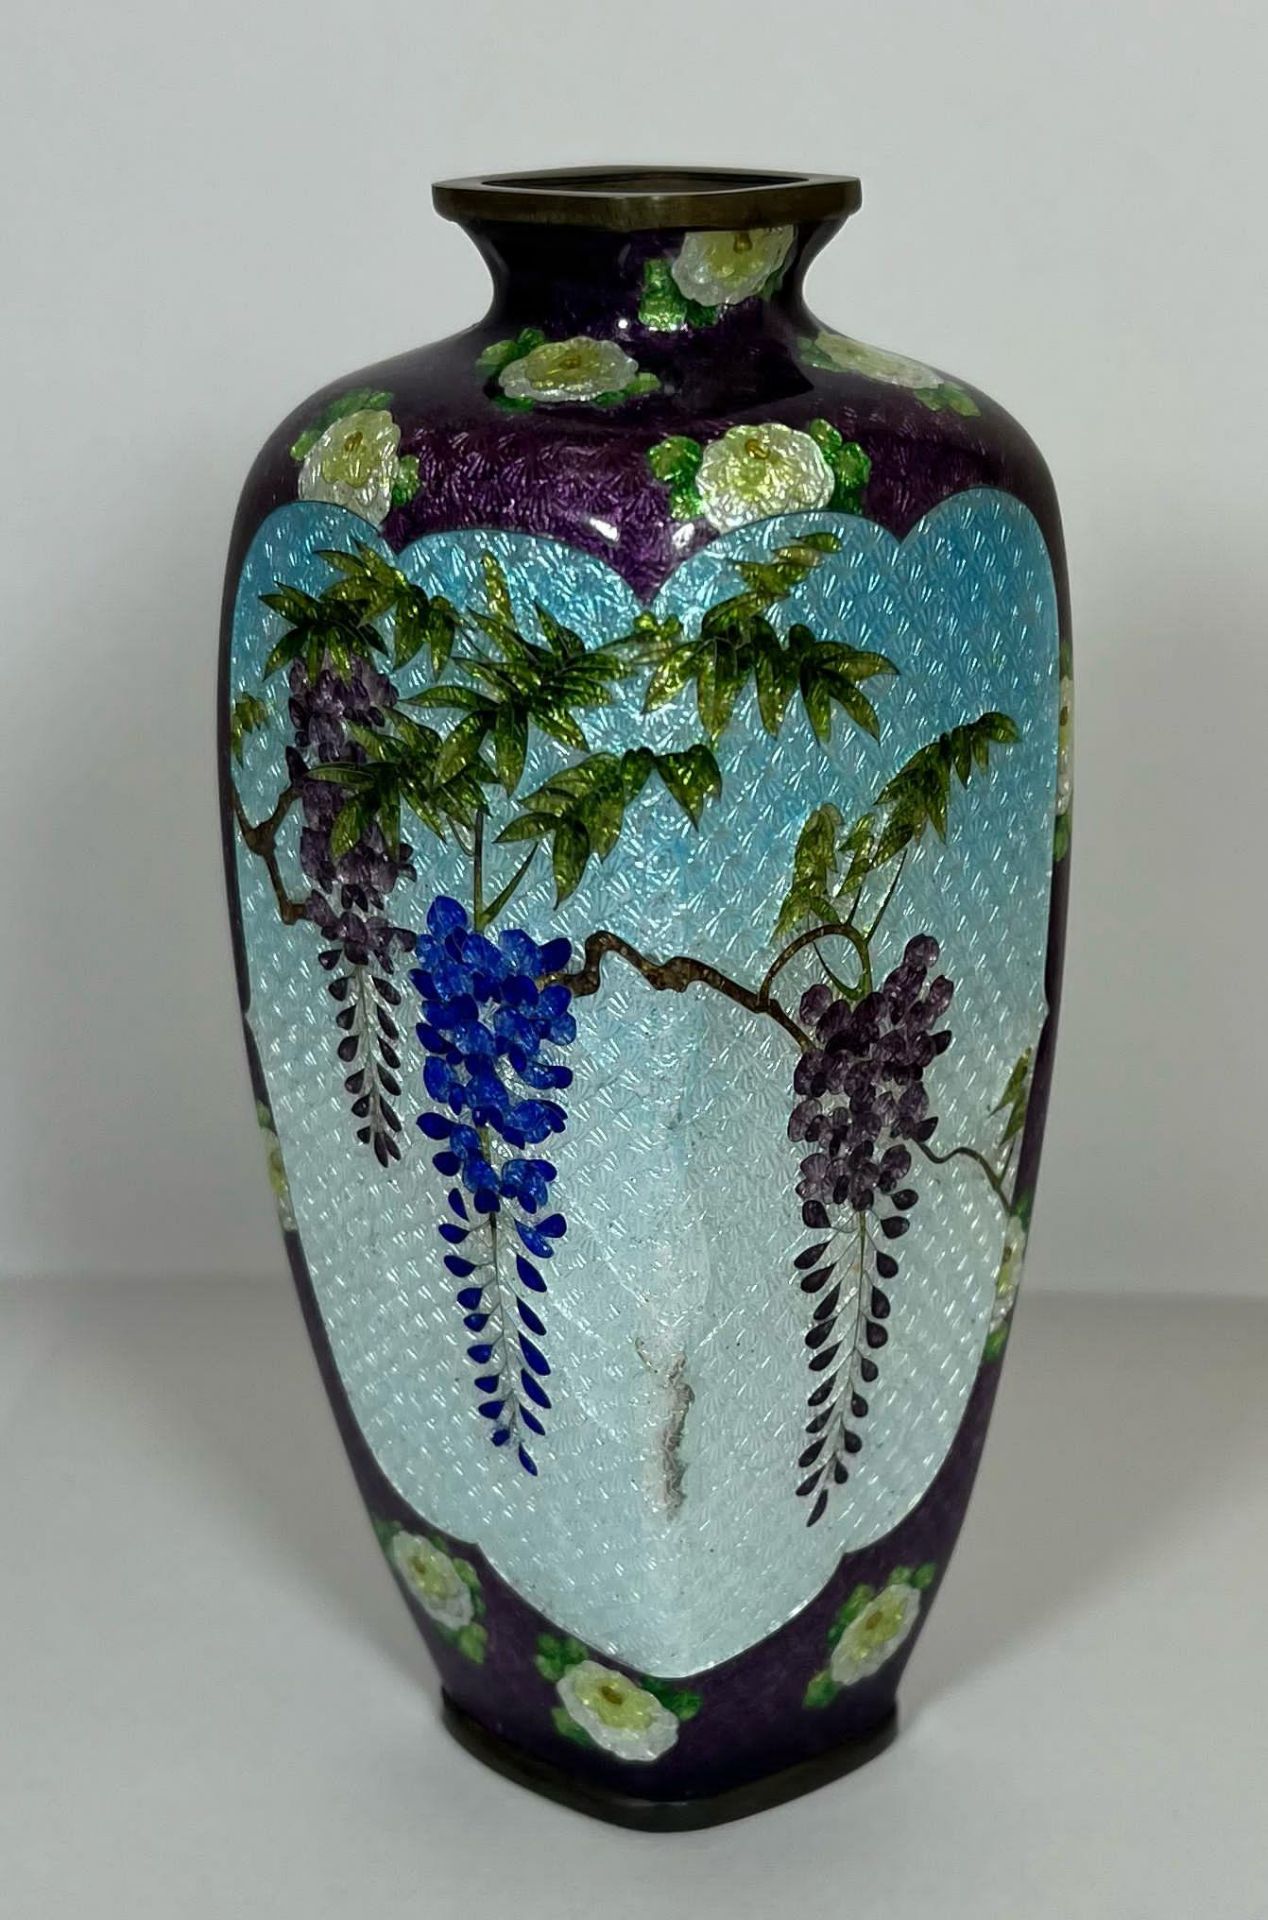 A JAPANESE GINBARI MEIJI PERIOD (1868-1912) ENAMEL DESIGN VASE DECORATED WITH A GEISHA GIRL BY A - Image 2 of 4